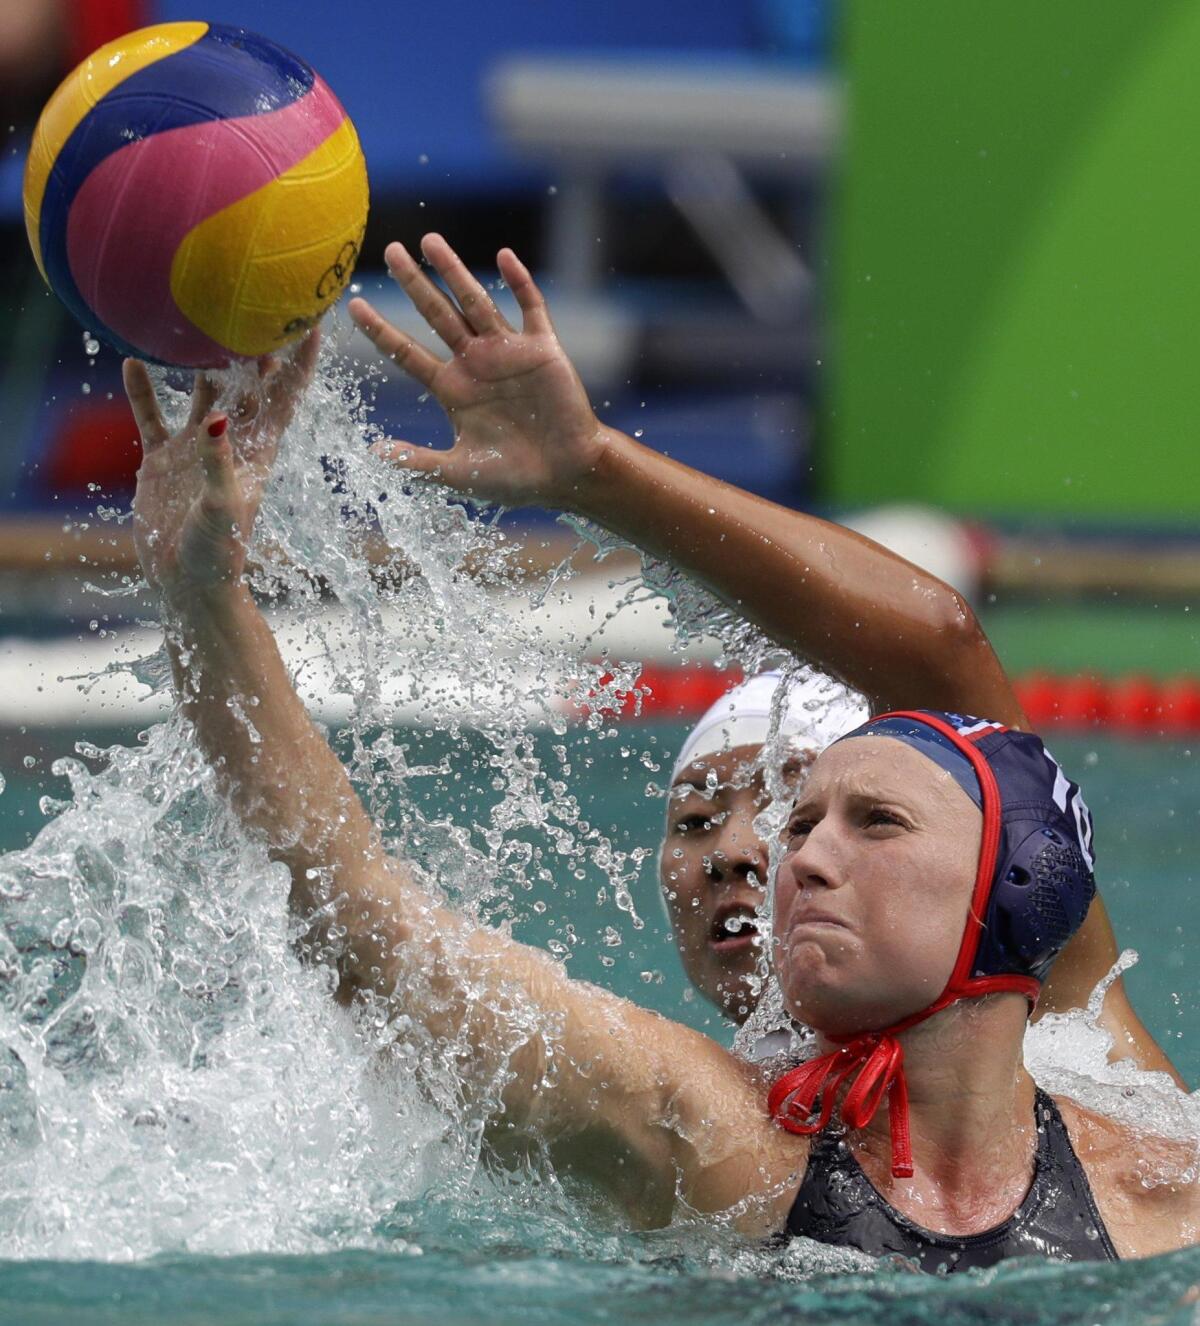 Kaleigh Gilchrist, foreground, and China's Donglun Song fight for possession during the U.S. women’s water polo team’s 12-4 victory Thursday at the Olympics in Rio de Janeiro.